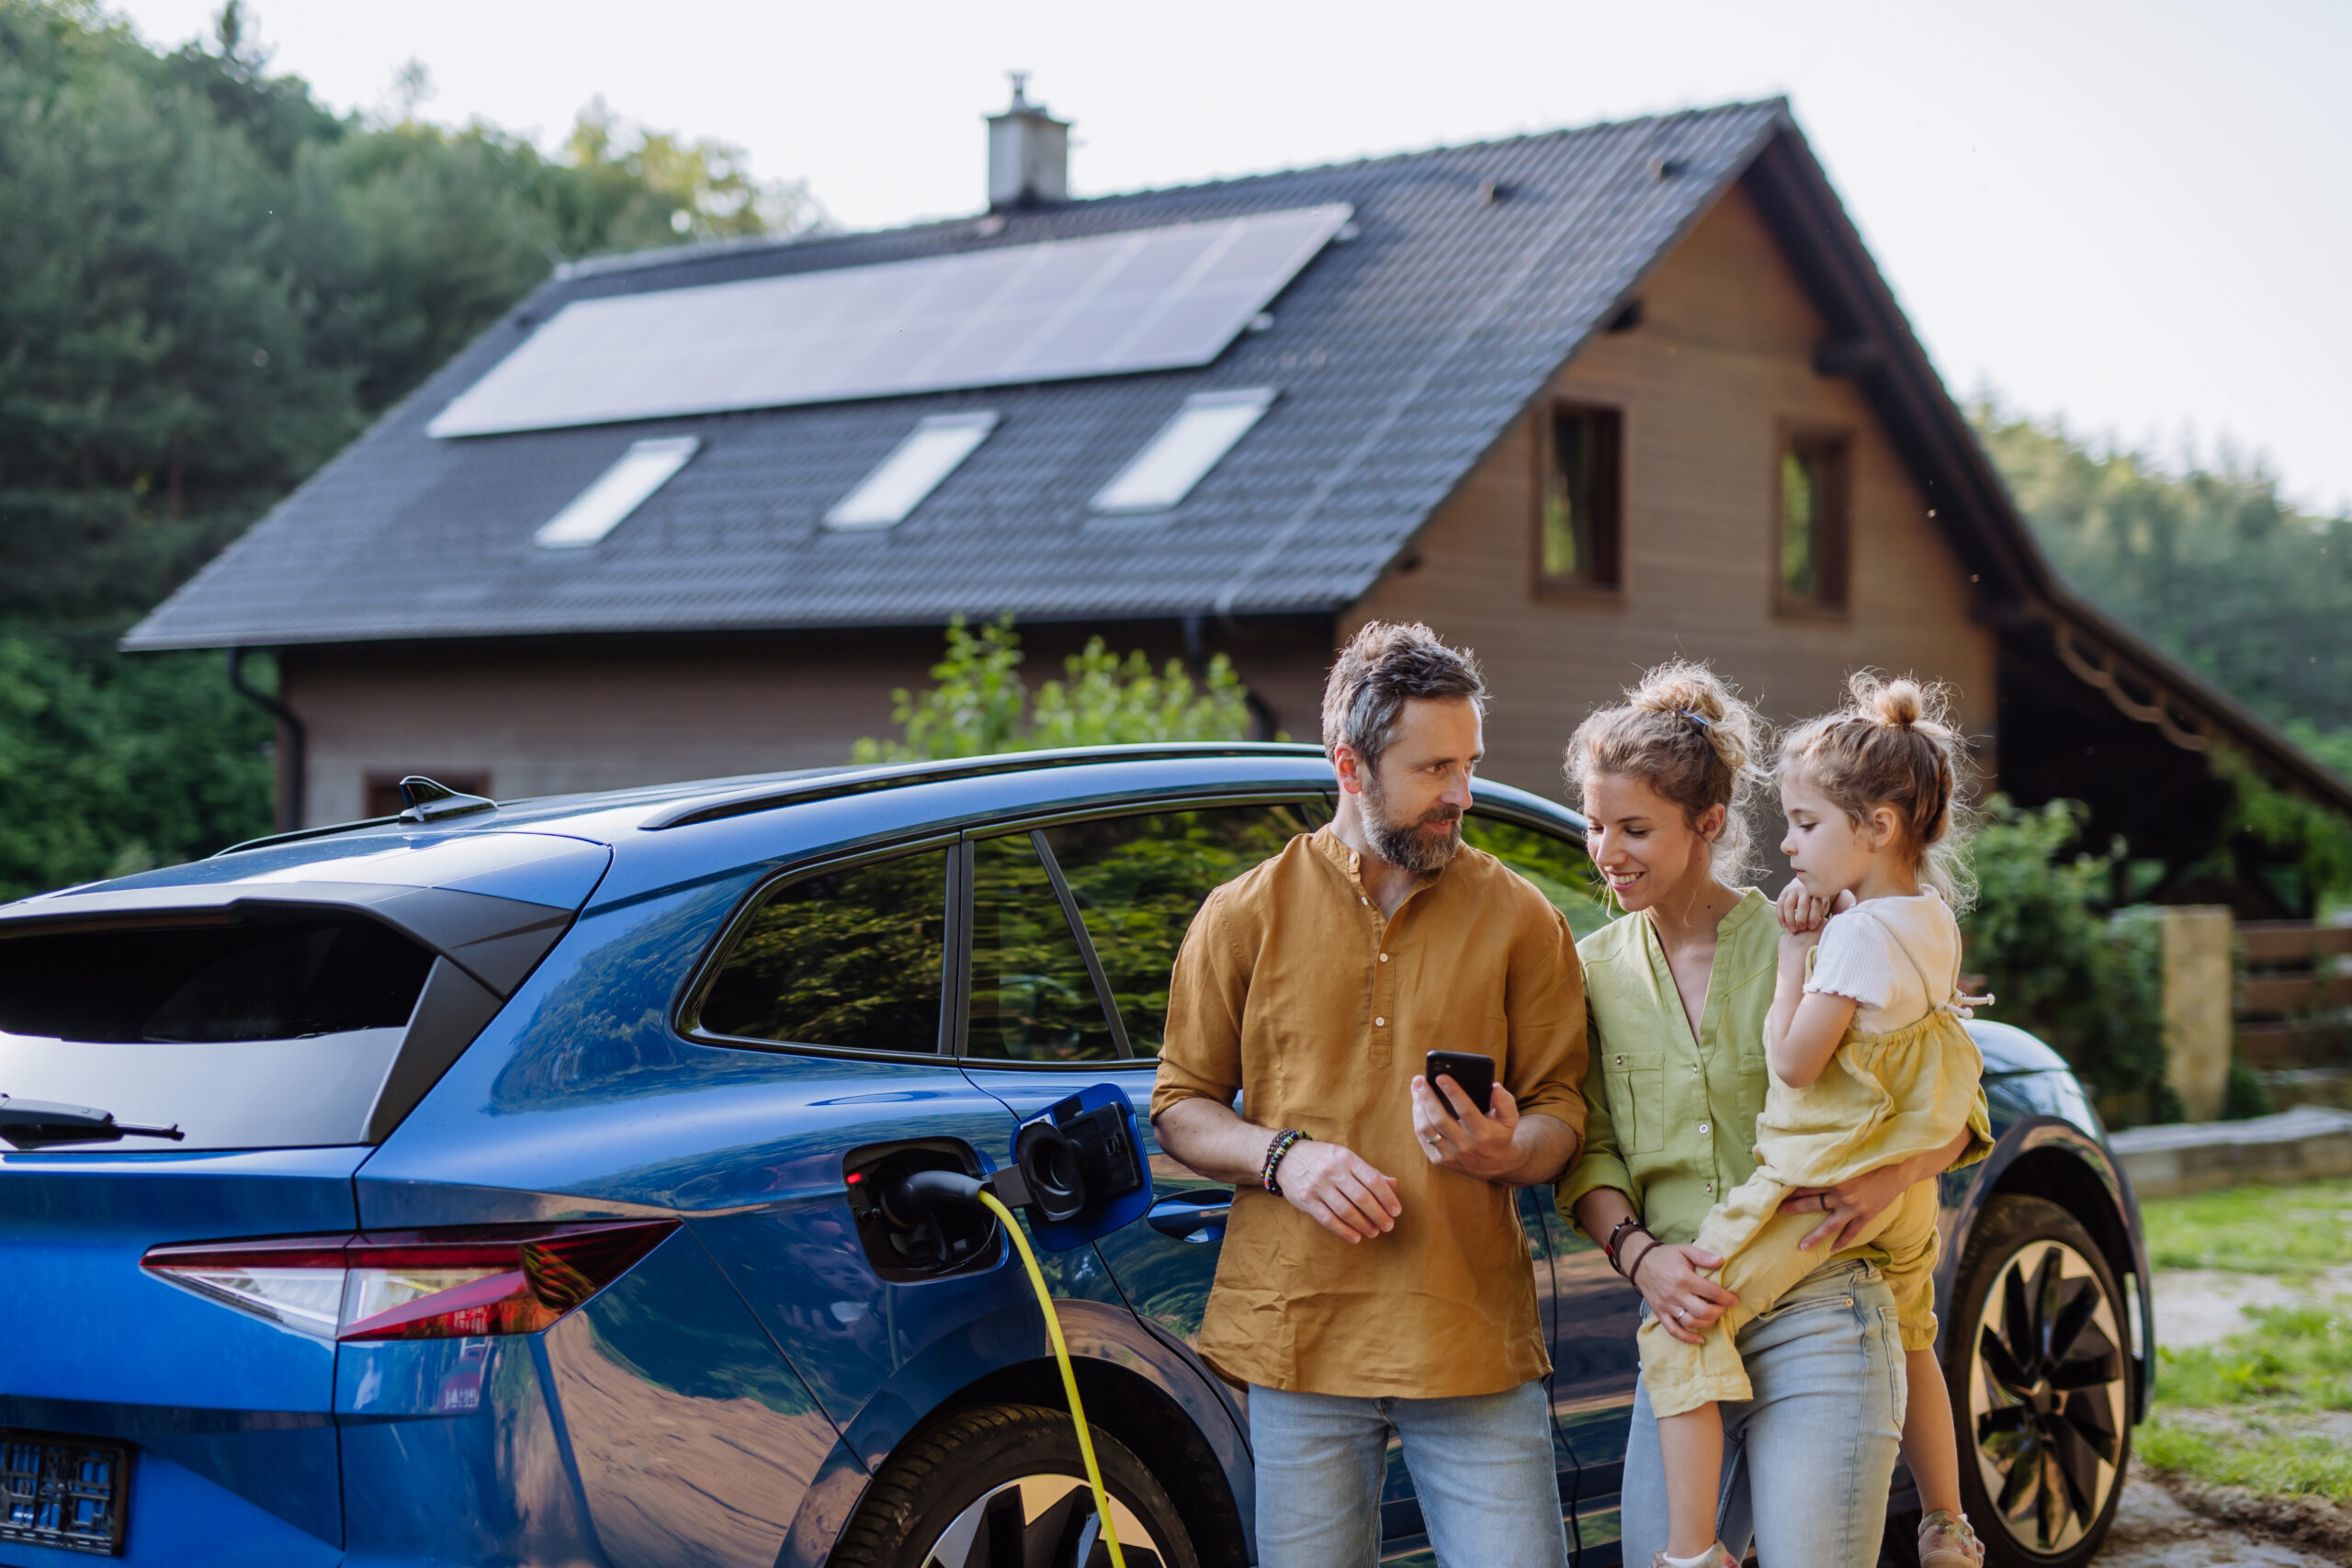 Family with little daughter standing in front of their house with solar panels on the roof, having electric car.